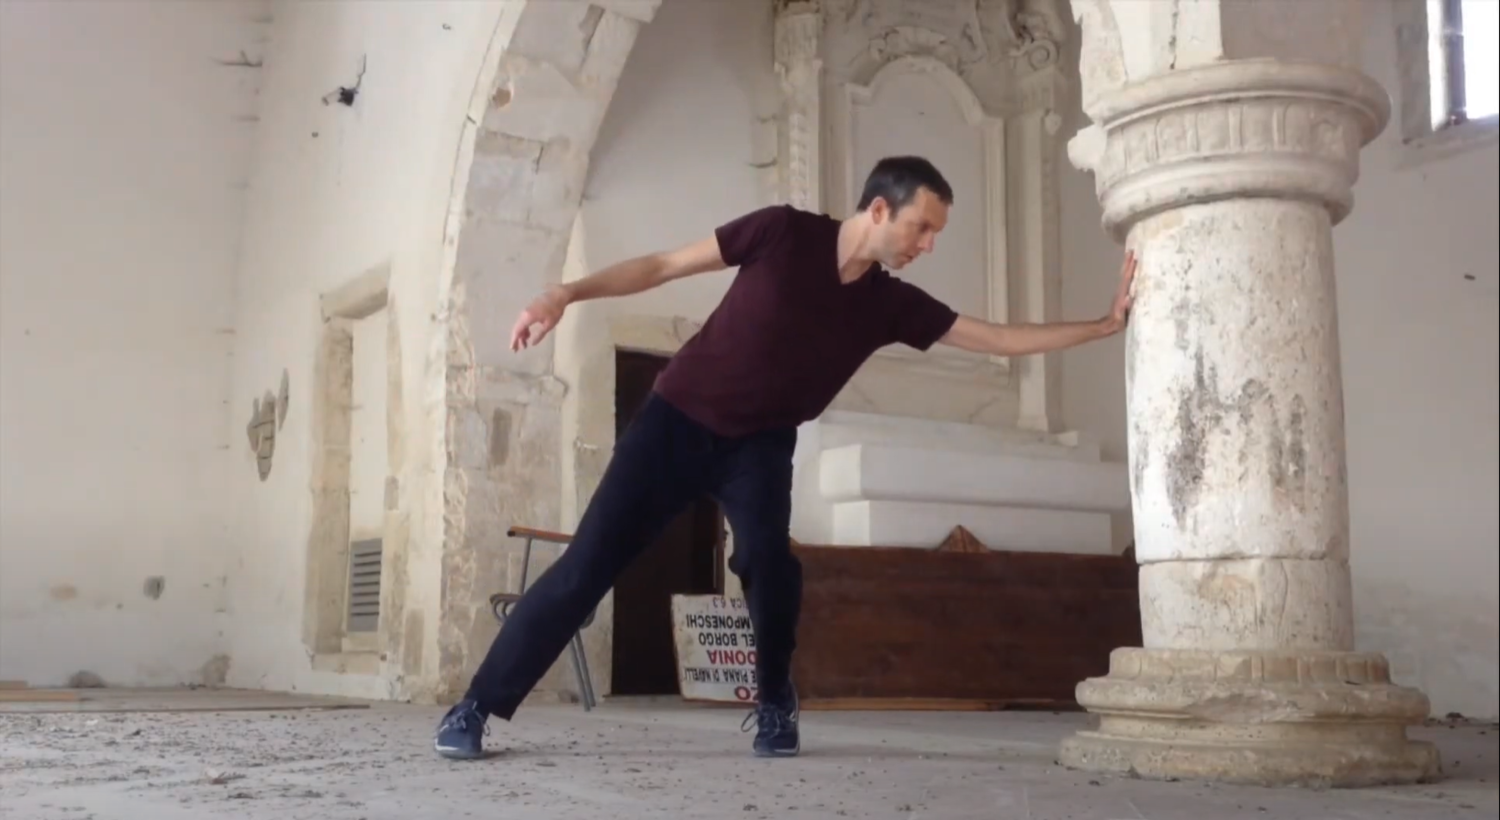 Kevin Skelton dancing in one of the restored churches in Capestrano post-earthquake.Alt text: A man dances in front of an archway, gracefully extending an arm to touch a column as the rest of his body adjusts to the distance